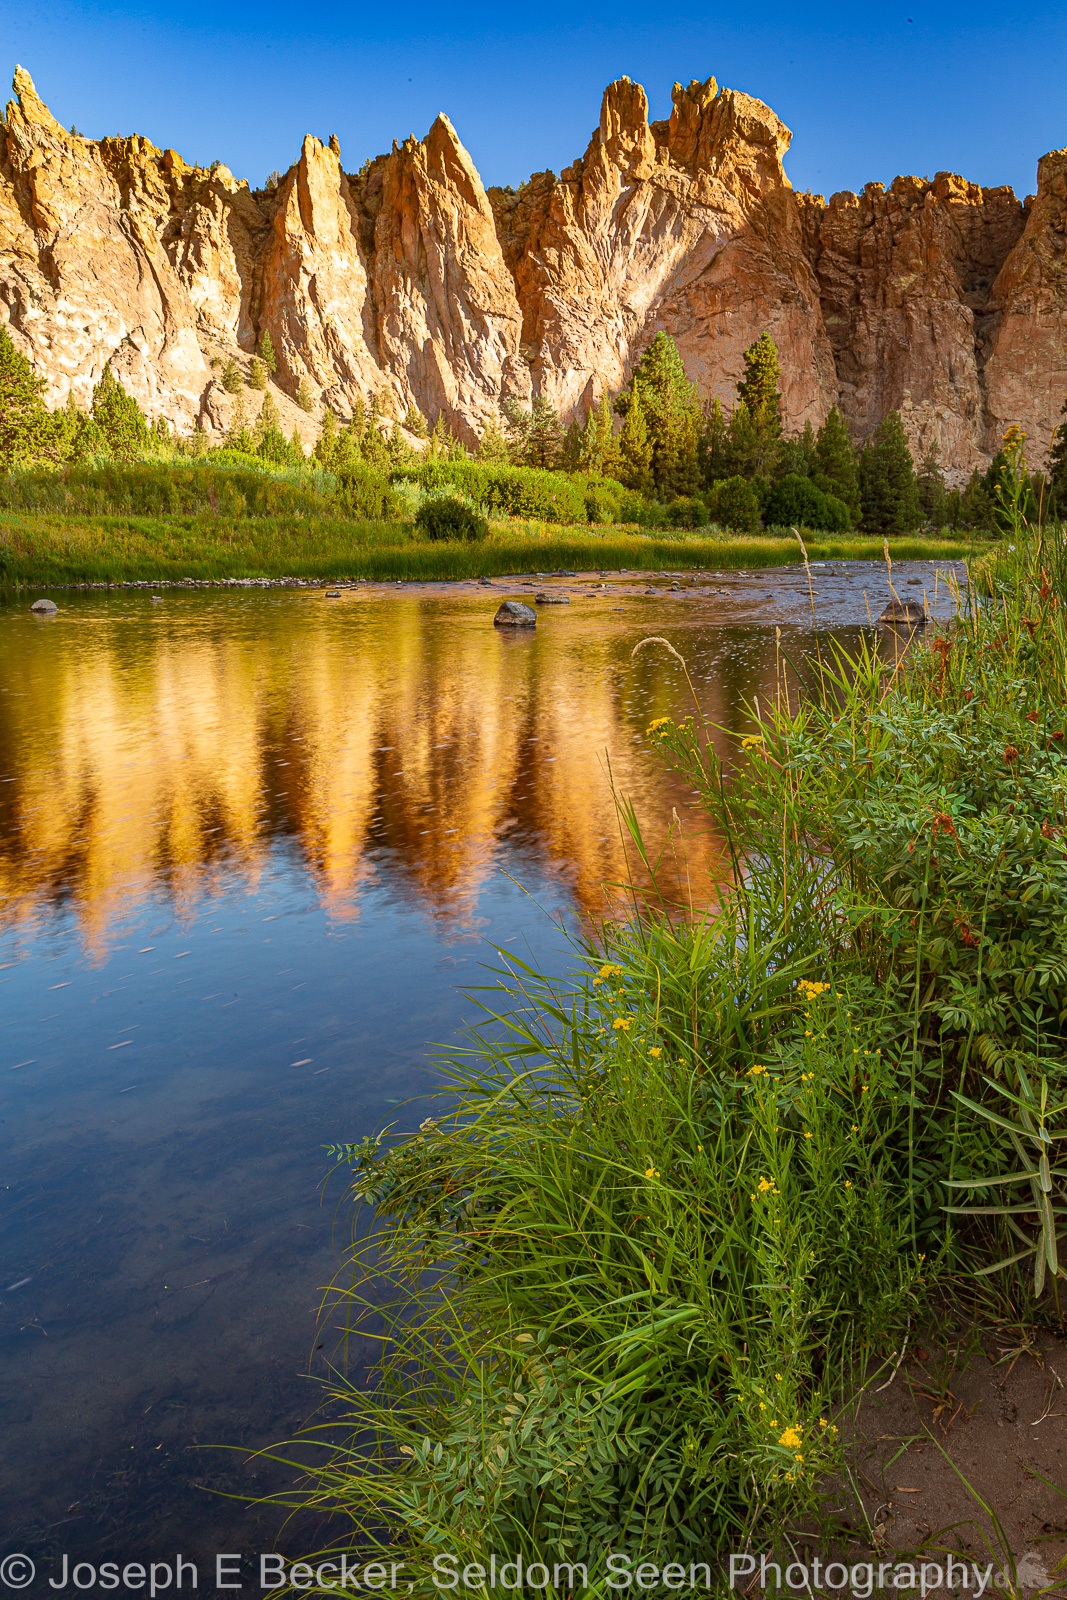 Image of Smith Rock State Park - Homestead Trail by Joe Becker